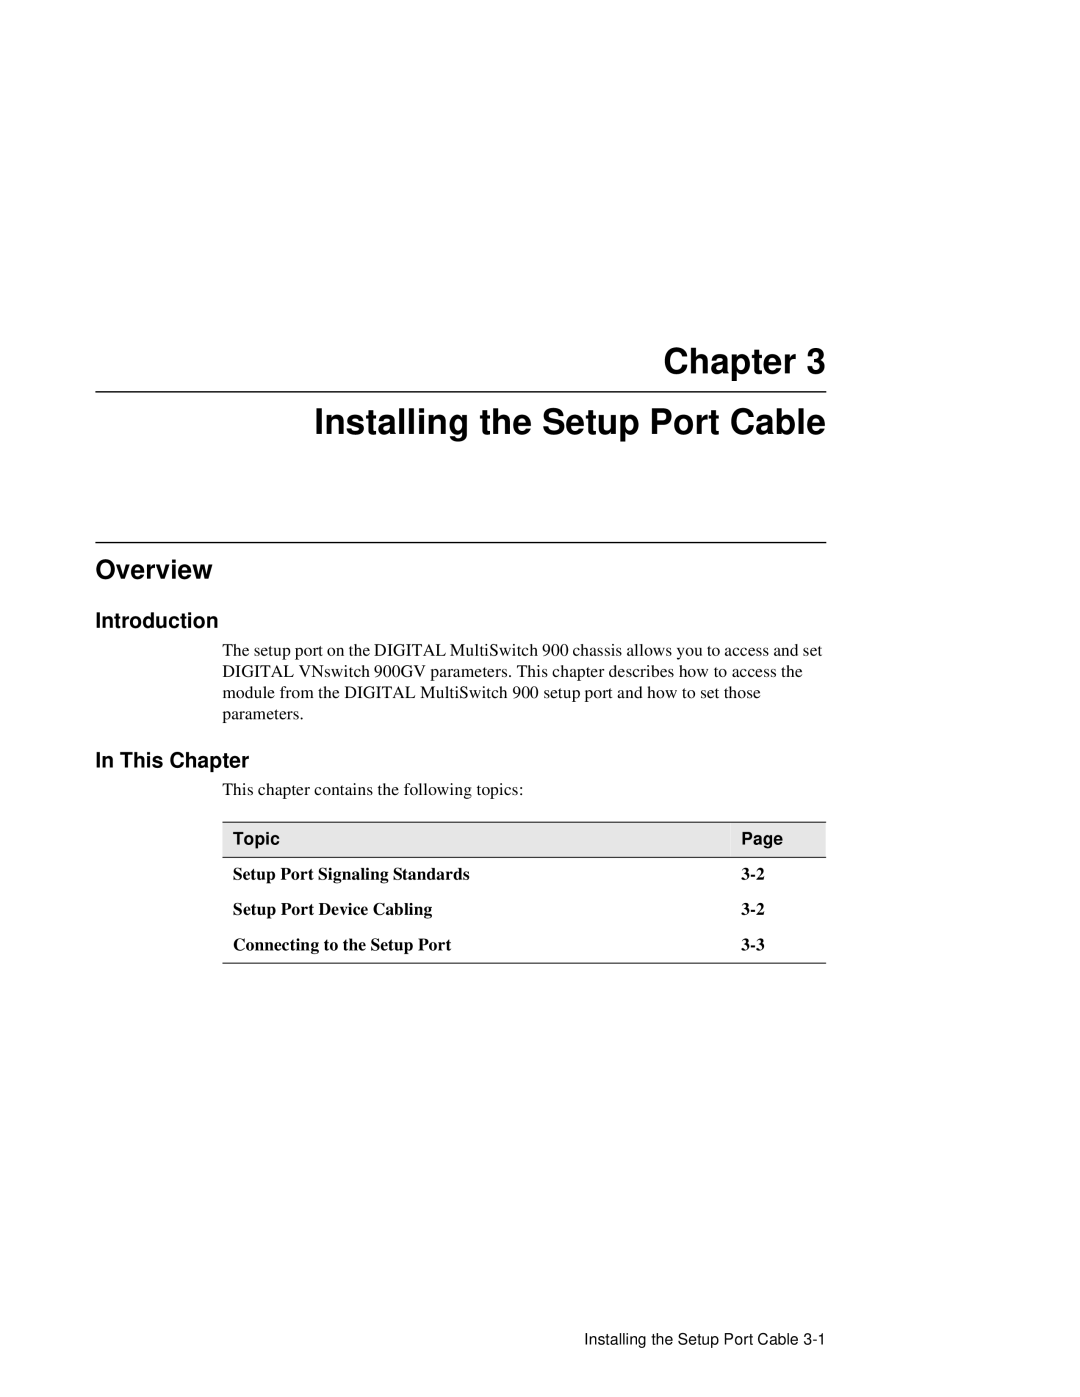 Network Technologies 900GV manual Chapter Installing the Setup Port Cable, Overview 